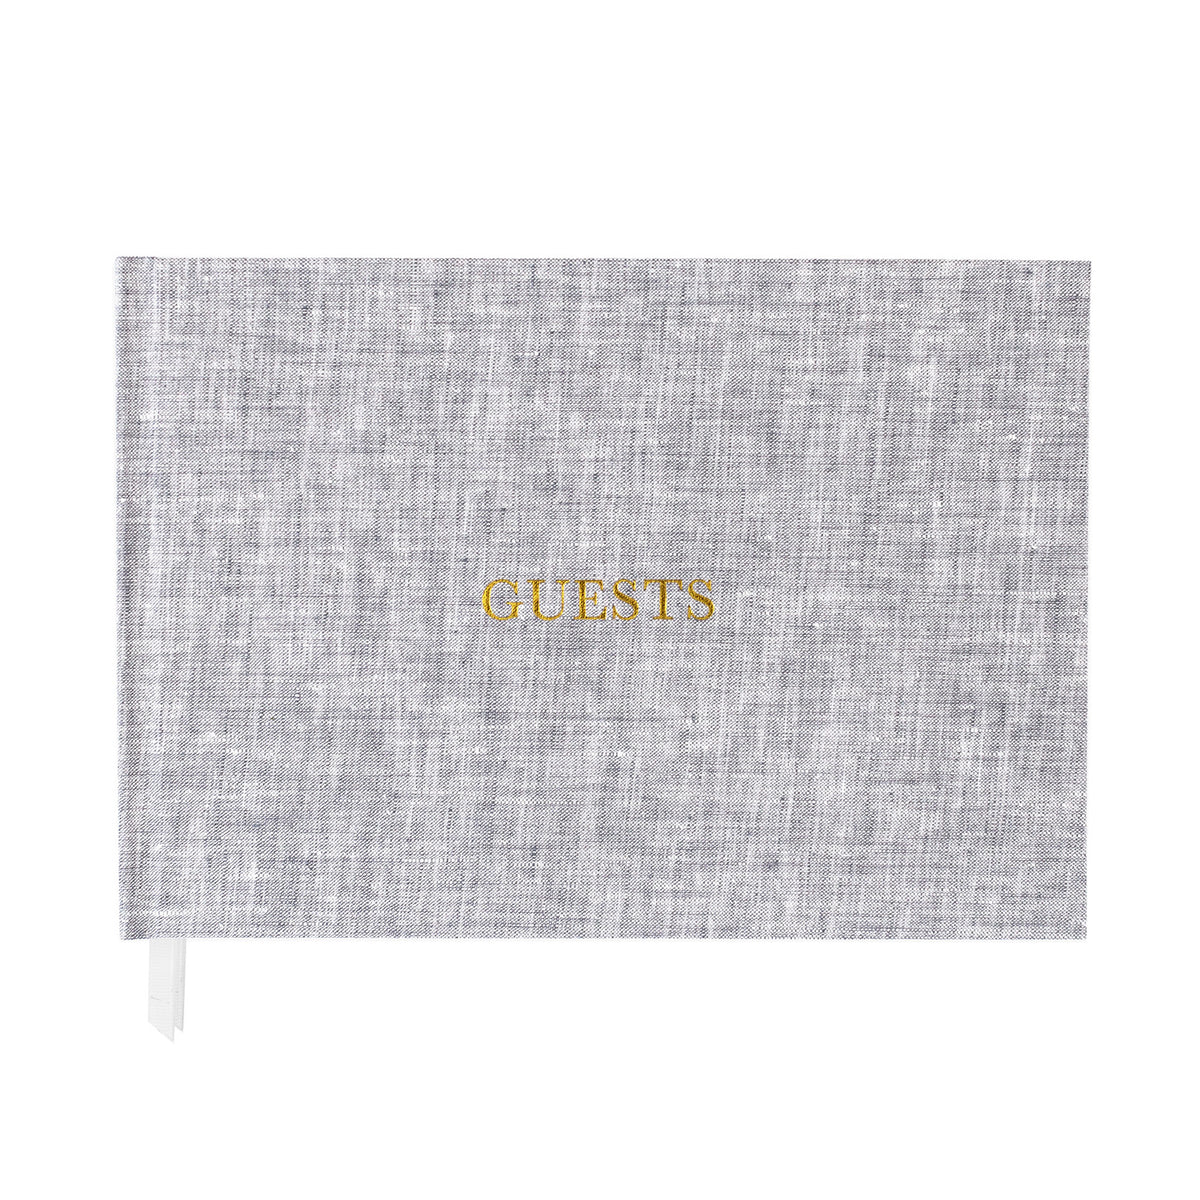 Heather Grey Linen Guest Book with Gold Foil Guests on the Cover